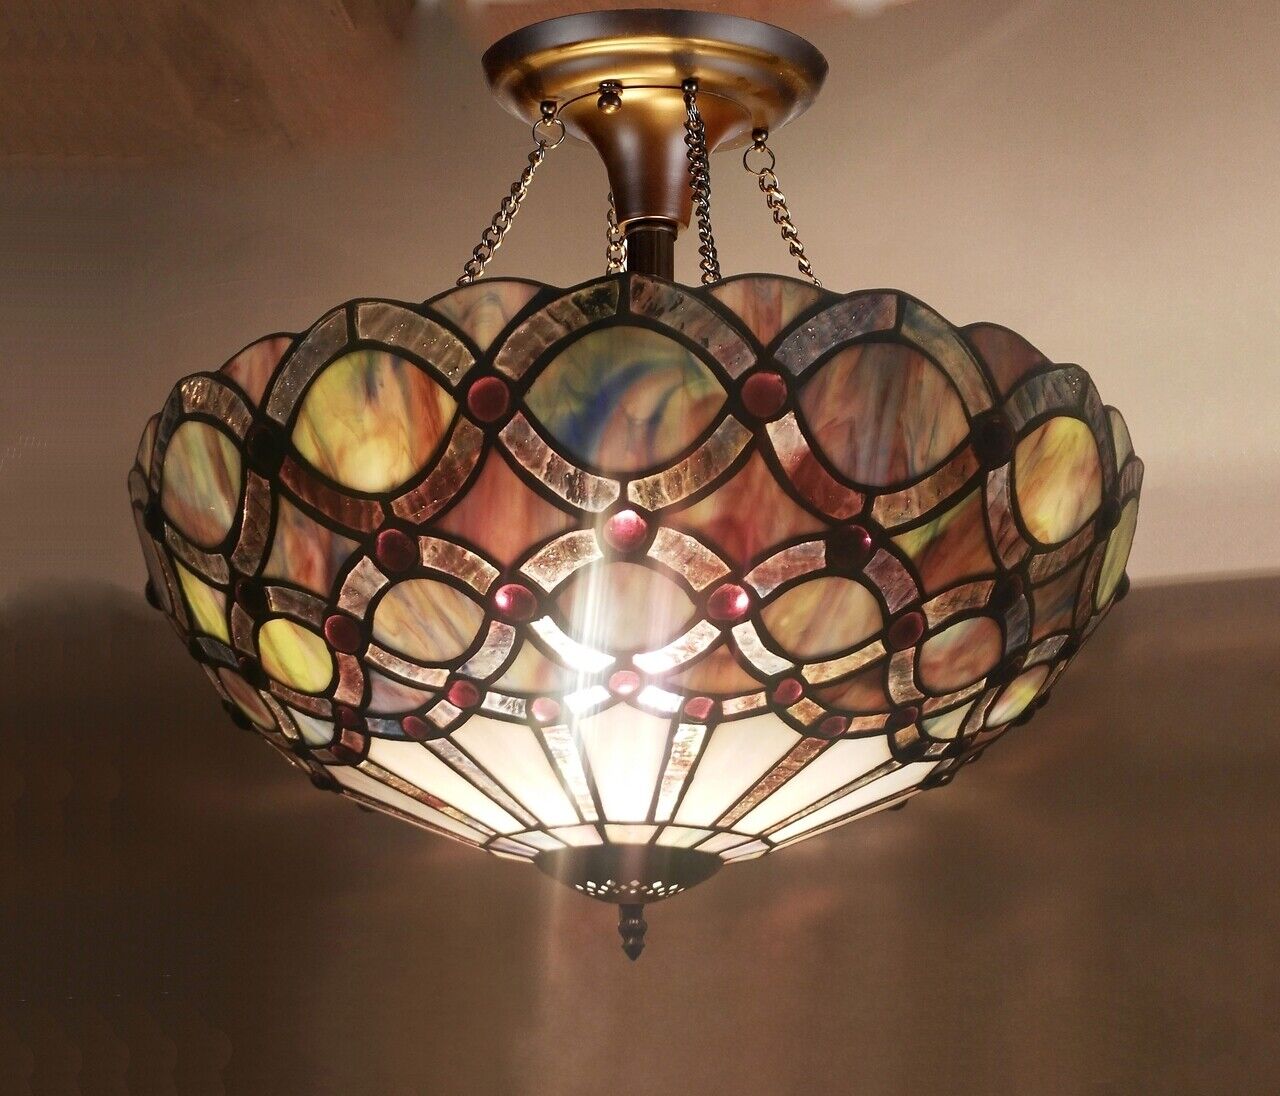 16" Antique Style Stained Glass Semi Flush Ceiling Uplight